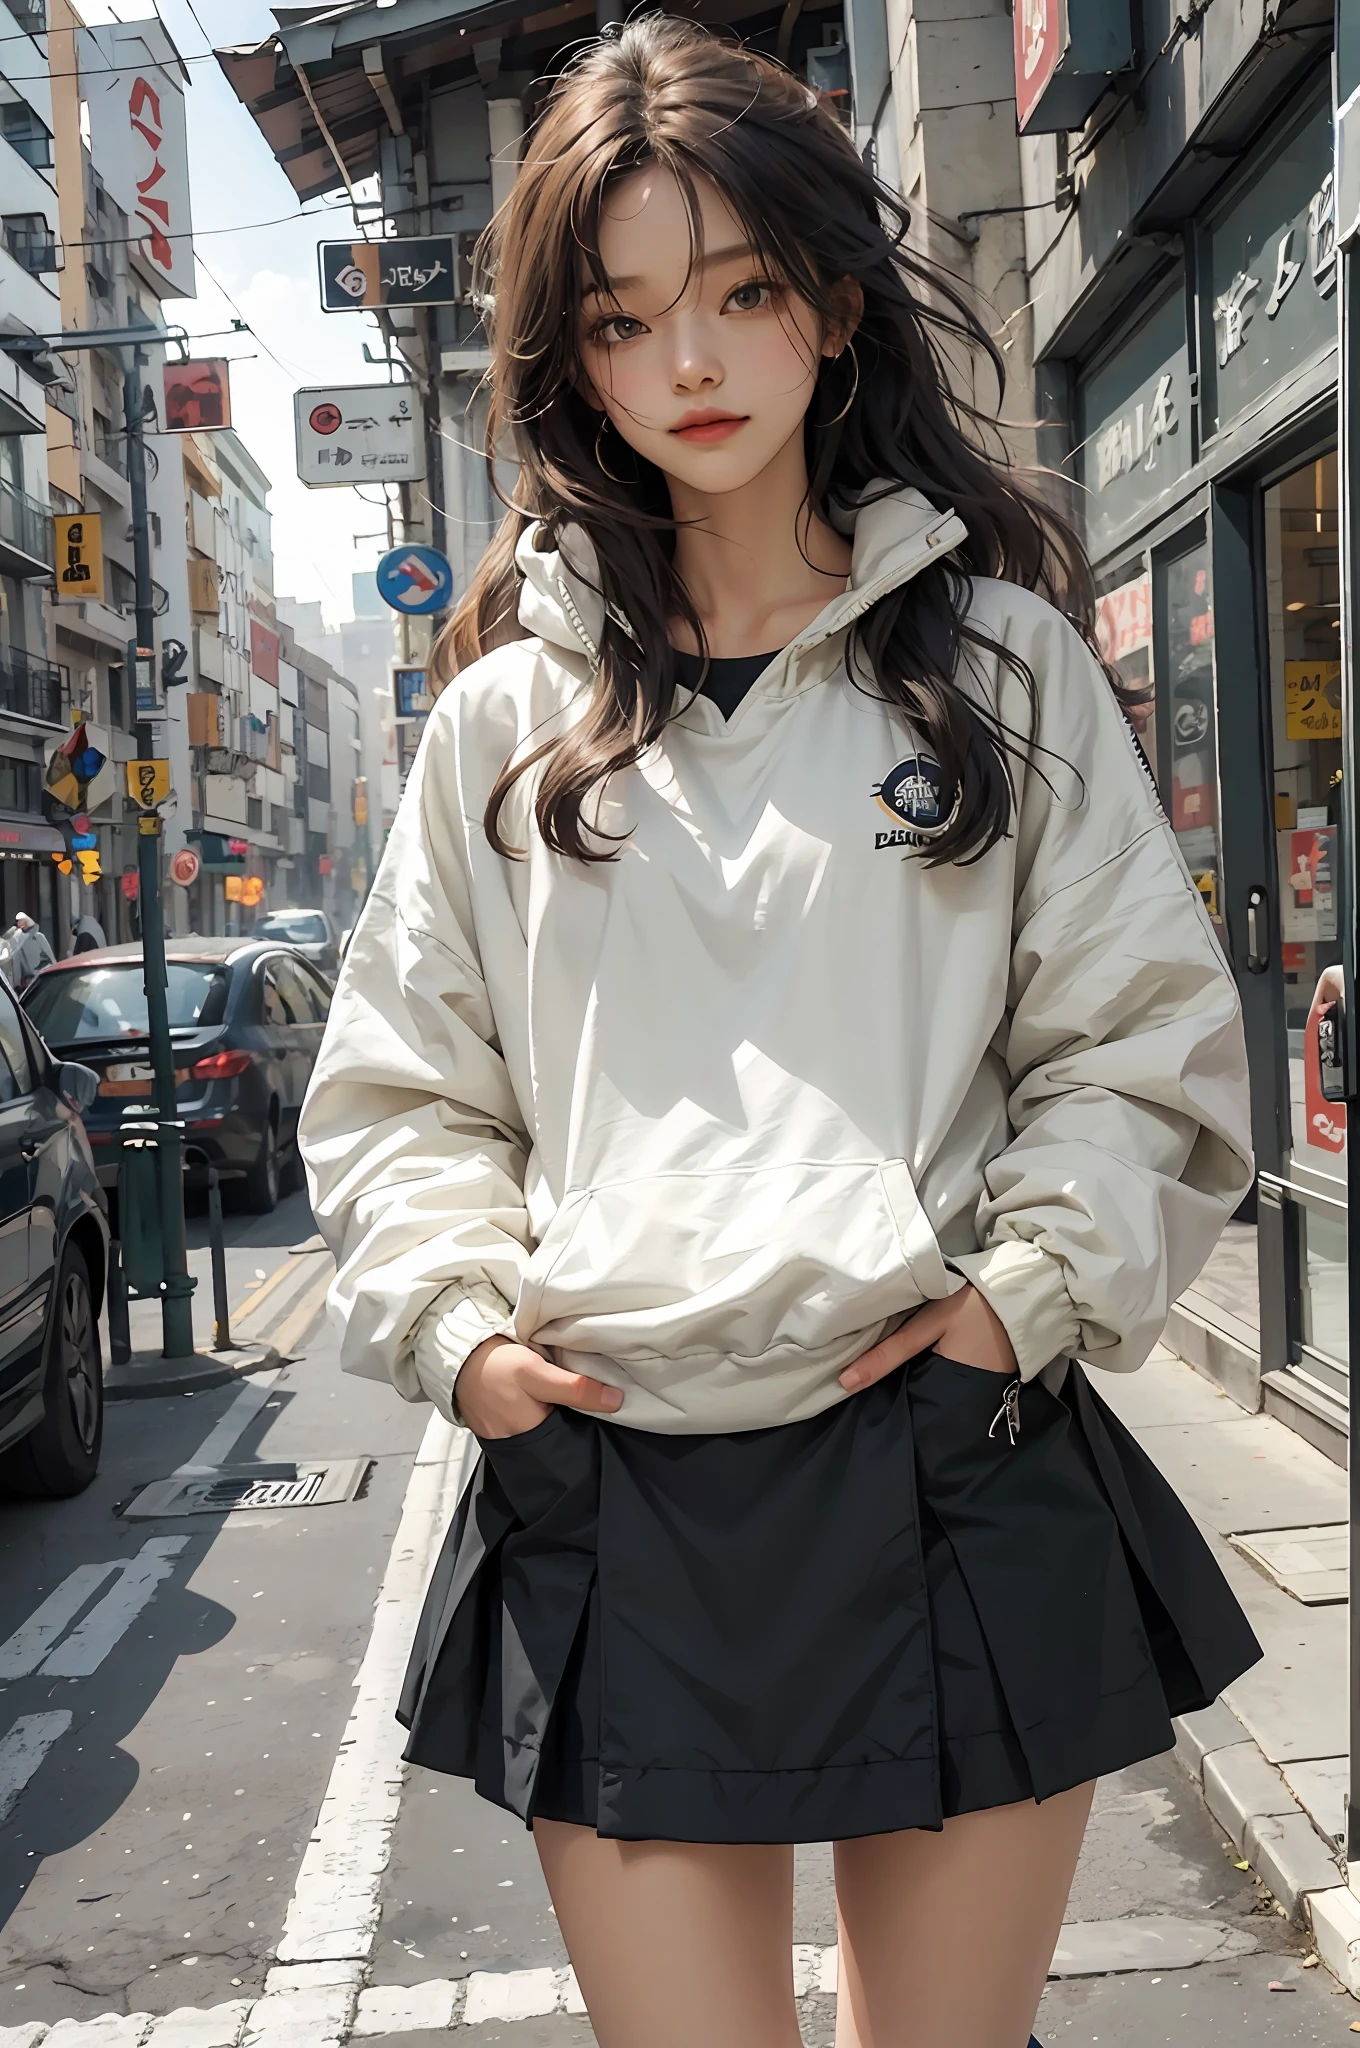 One long hair Girl，Stylish sweatshirt, Windbreaker long skirt，Poster on the front，The color of the clothes is bright and simple，Cute, Very aesthetic，Realistic style anime，ssmile，self-assured，Put your hands in your pockets，tmasterpiece，ultraclear，8K，HighestQuali，